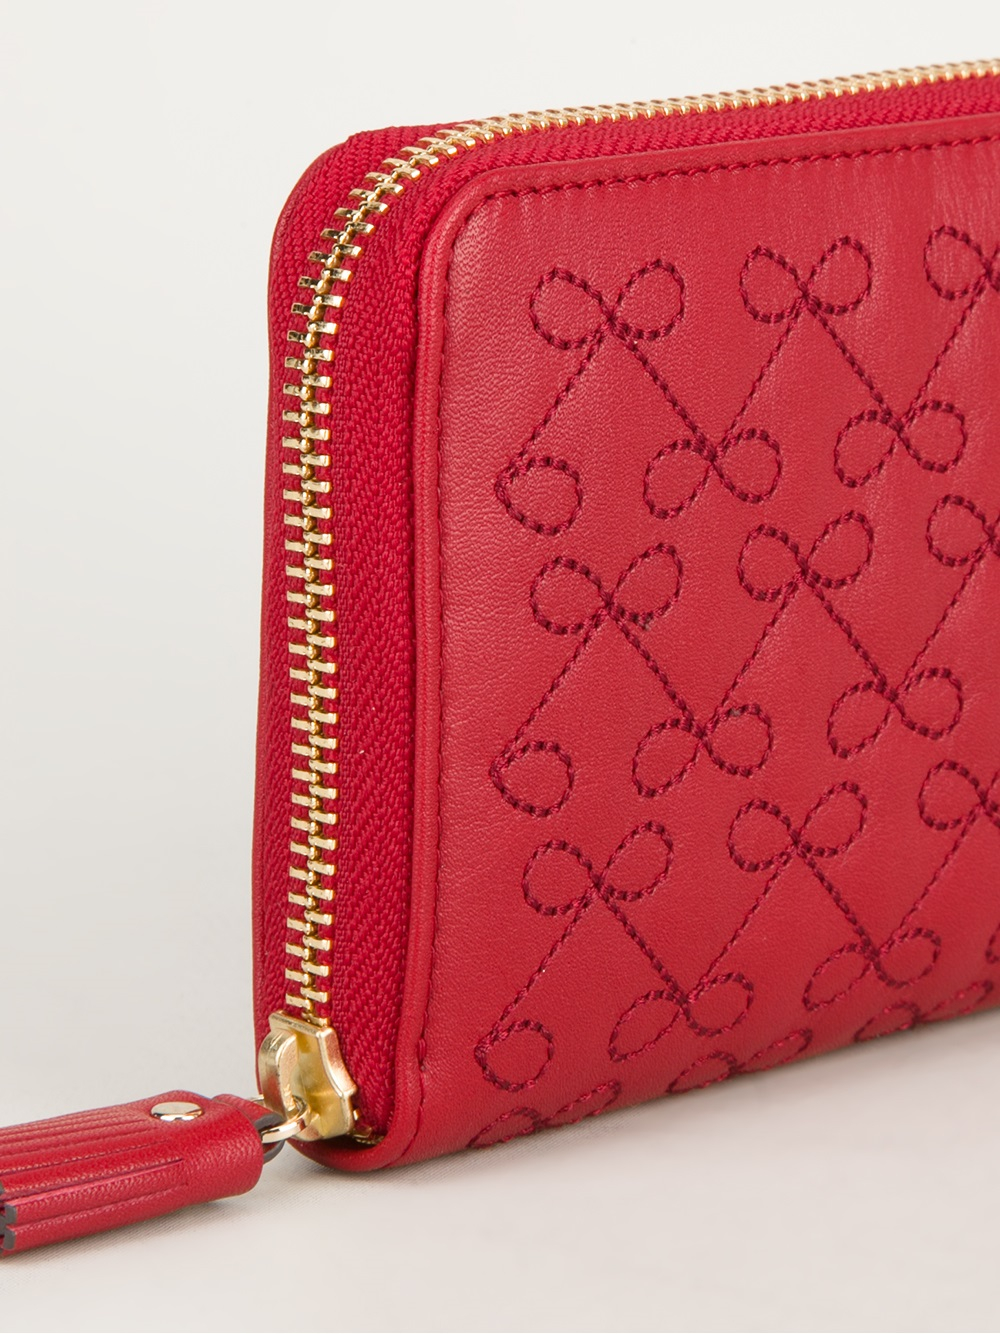 Anya Hindmarch Brand Patterned Wallet in Red - Lyst